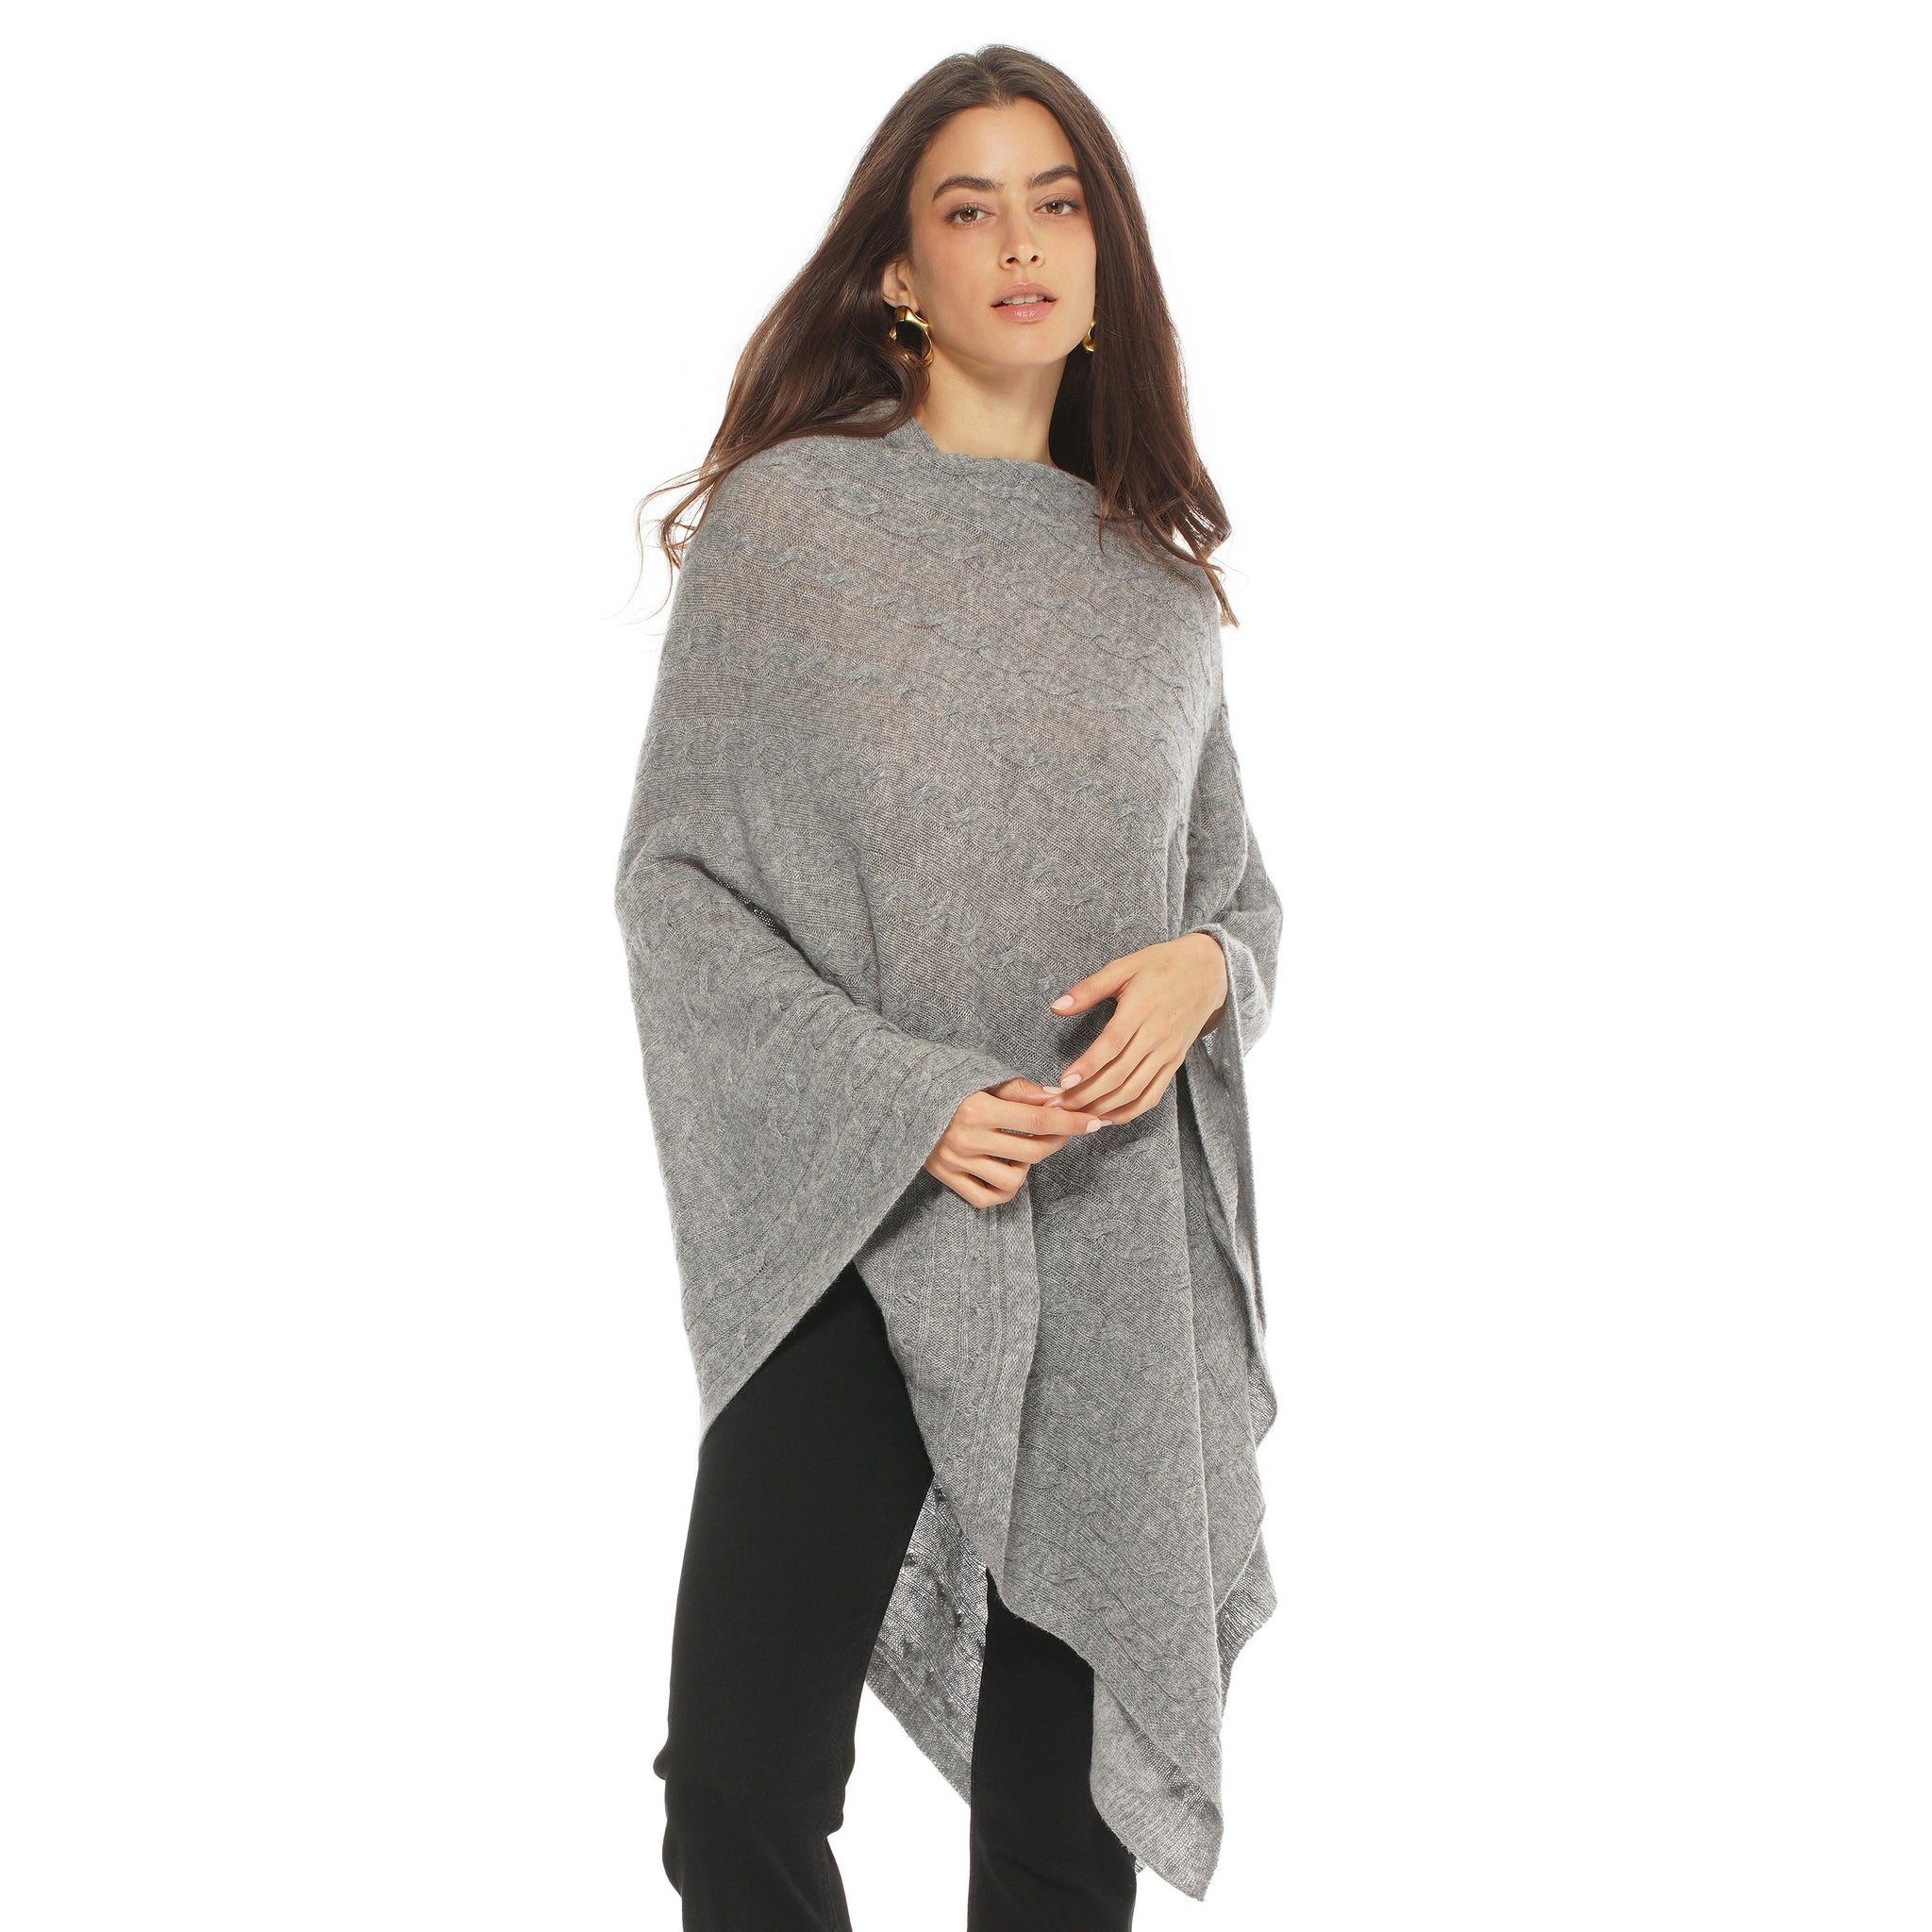 Women's Cashmere Poncho, Women's Cable Knit